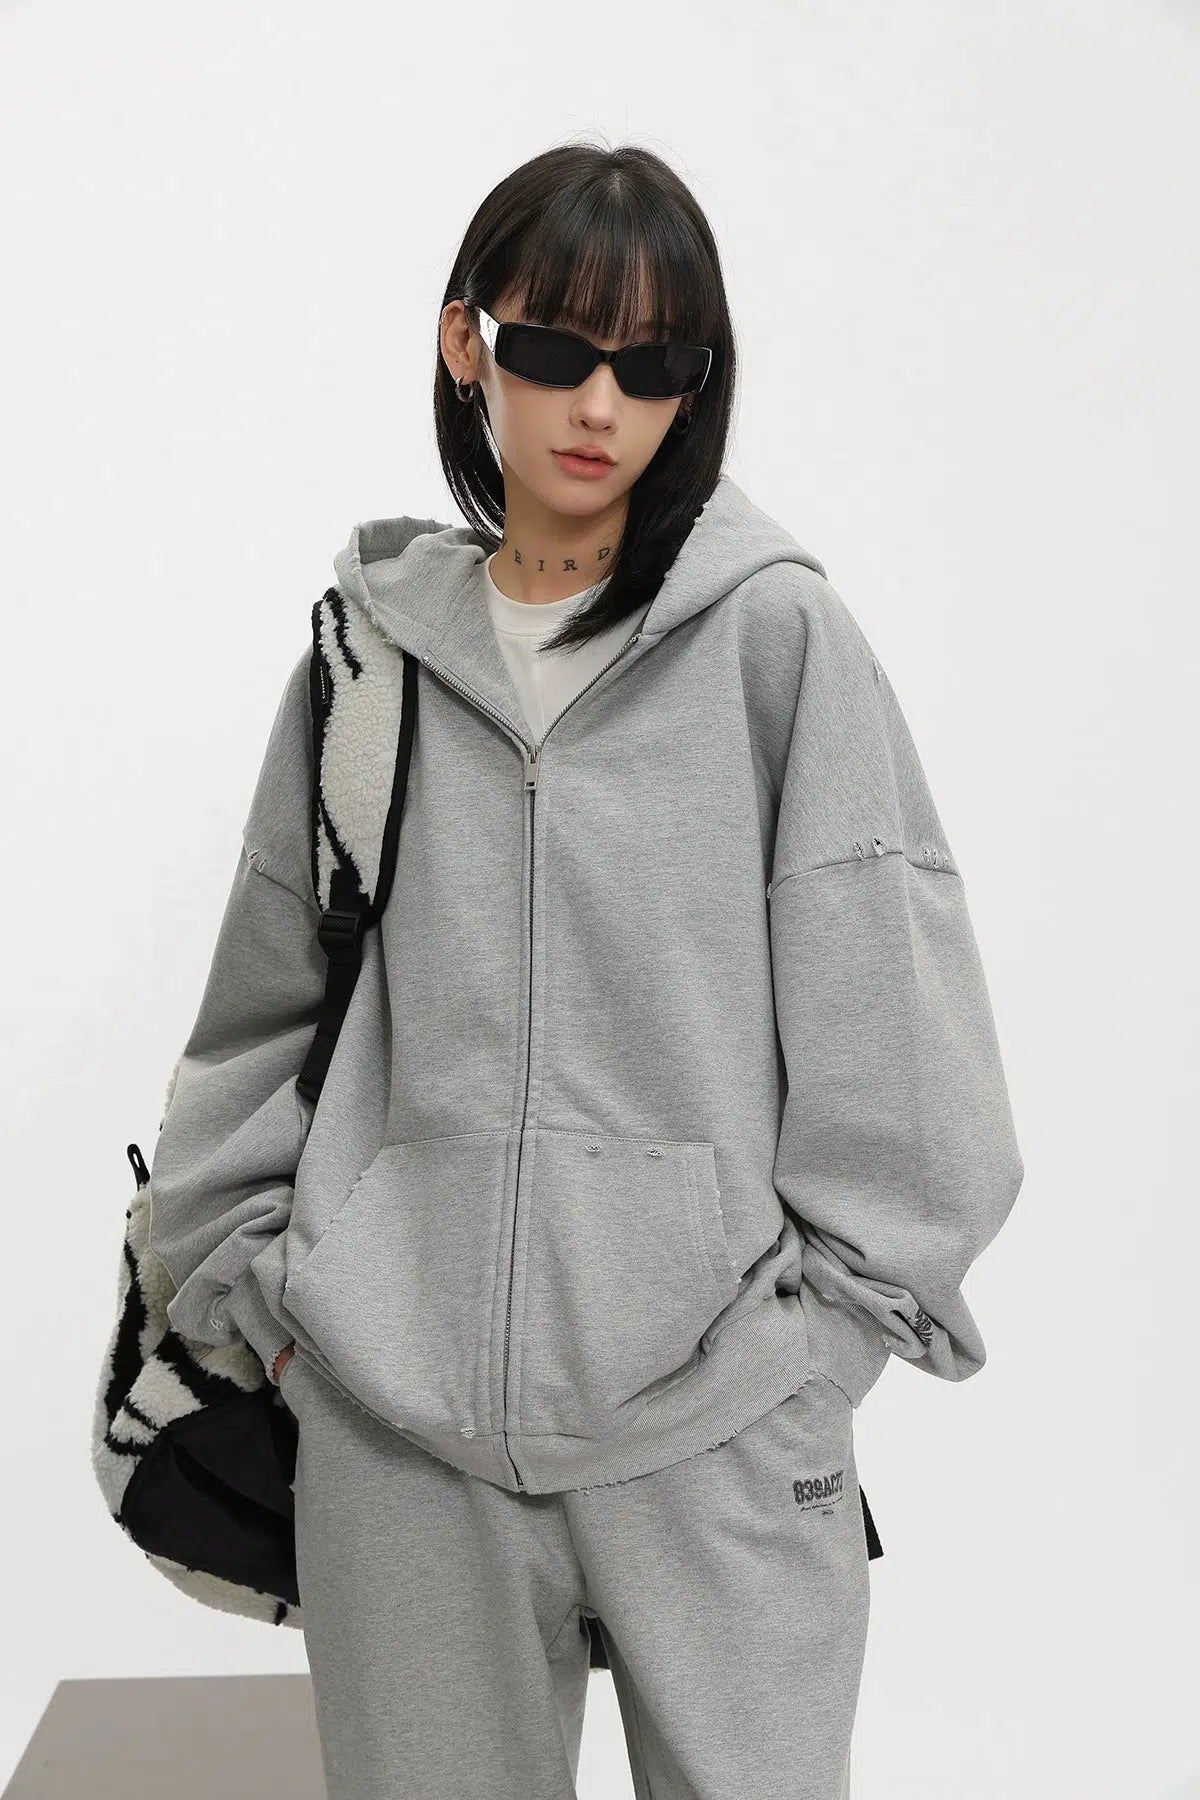 Ace Distressed Lettered Zip-Up Hoodie & Casual Sweatpants Set-korean-fashion-Clothing Set-Ace's Closet-OH Garments